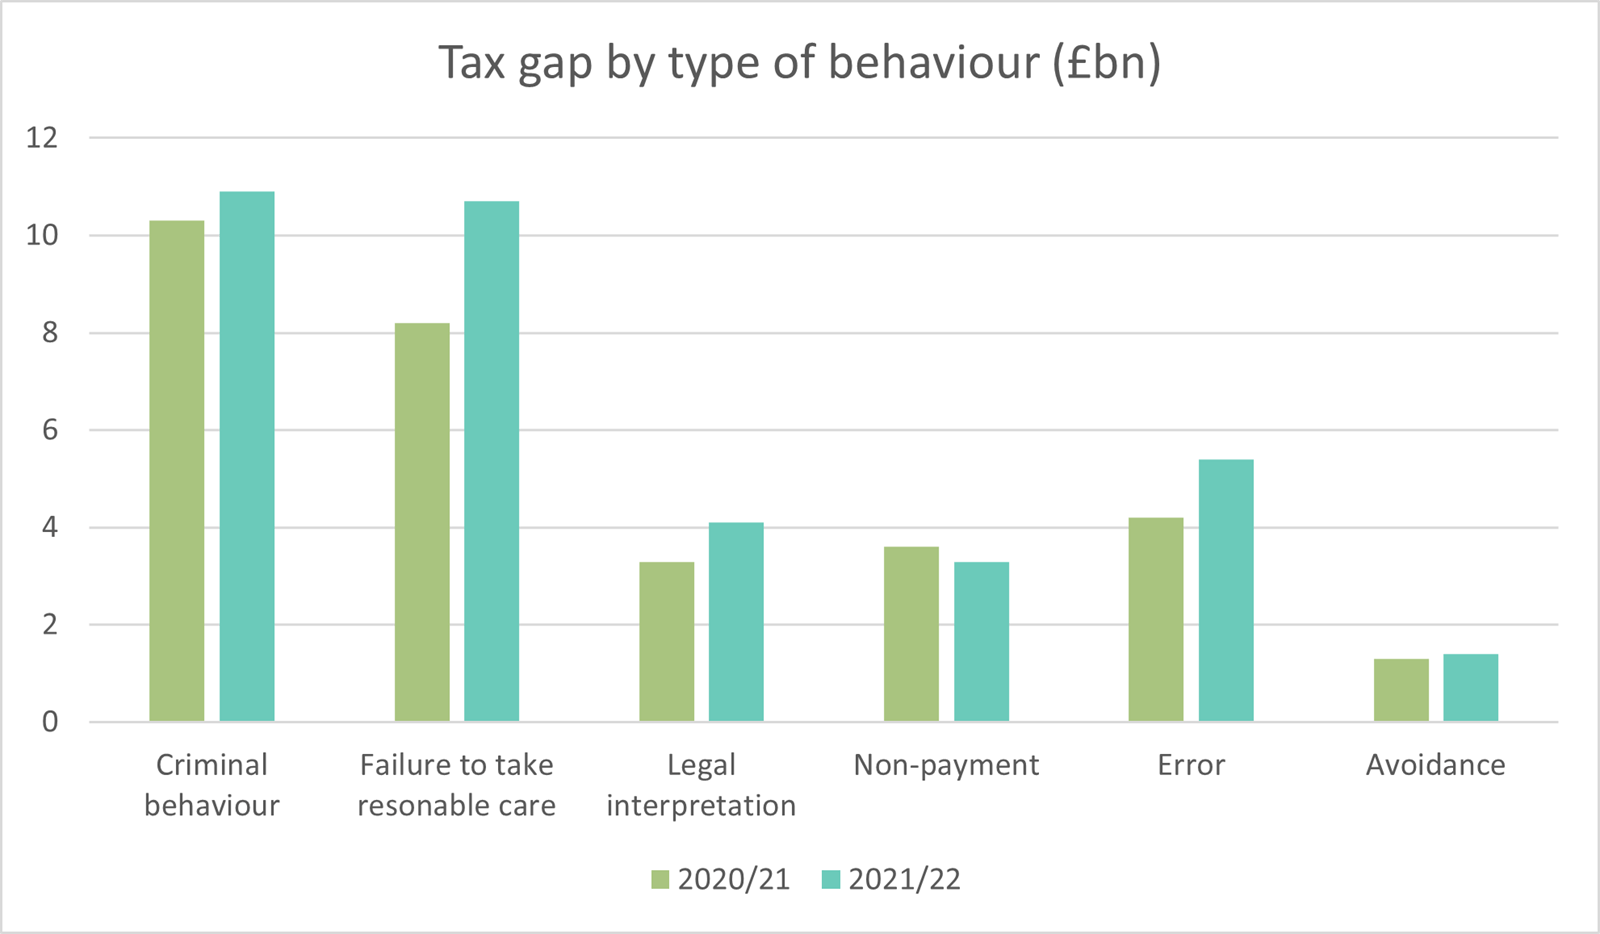 Table showing the tax gap comparison for 2020/21 to 2021/2022 by type of behaviour according to HMRC data.